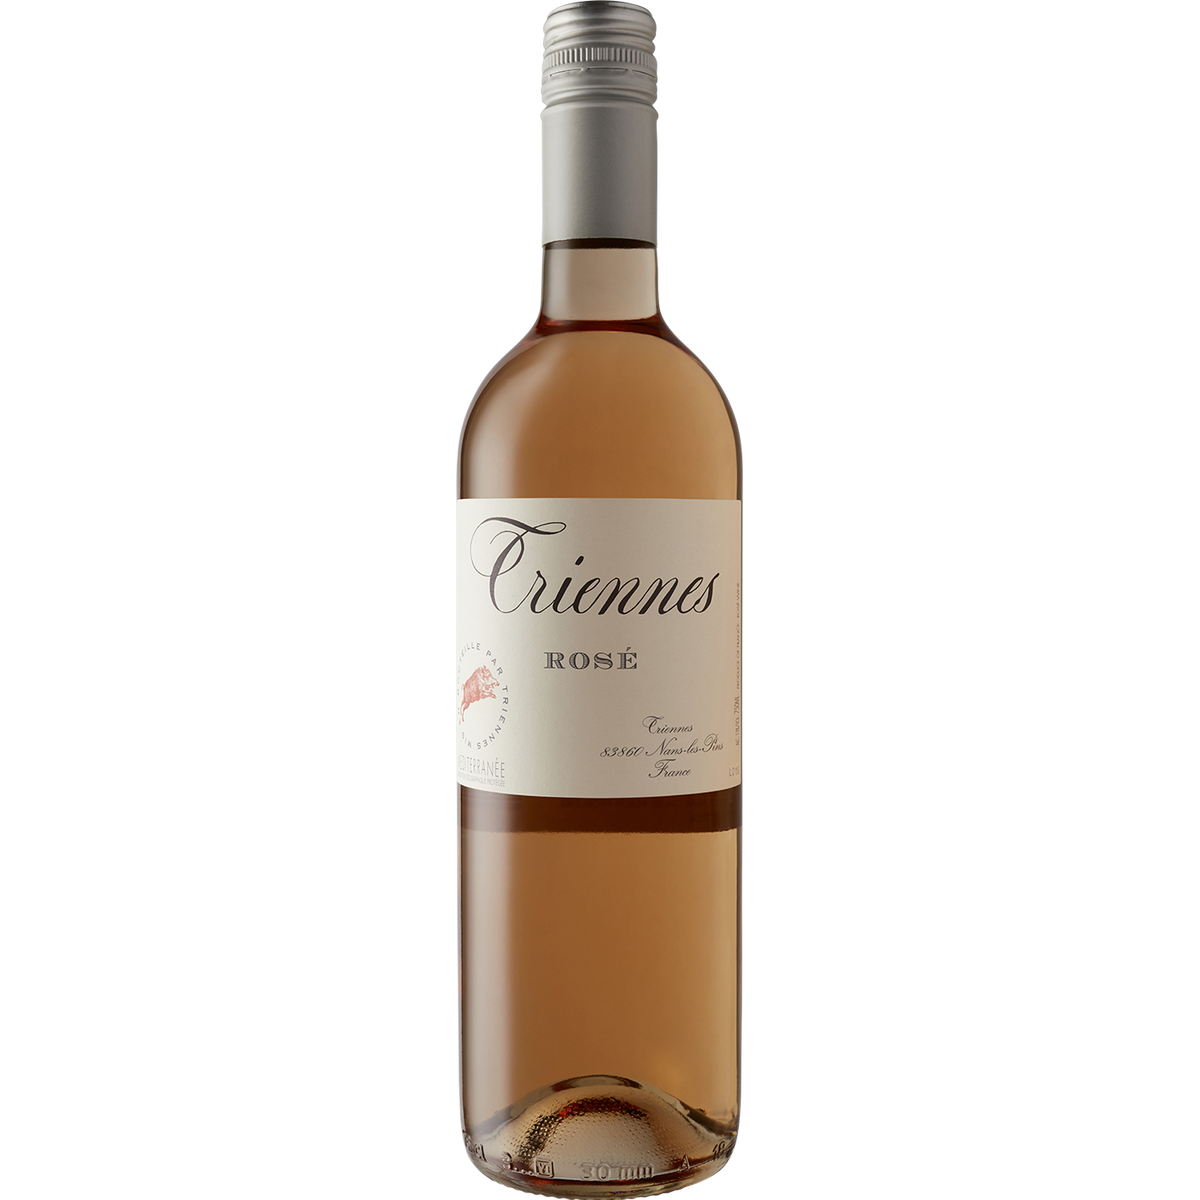 Our Triennes IGP Mediterranean Rose 2019 Triennes are fashionable  practical, economical, and affordable